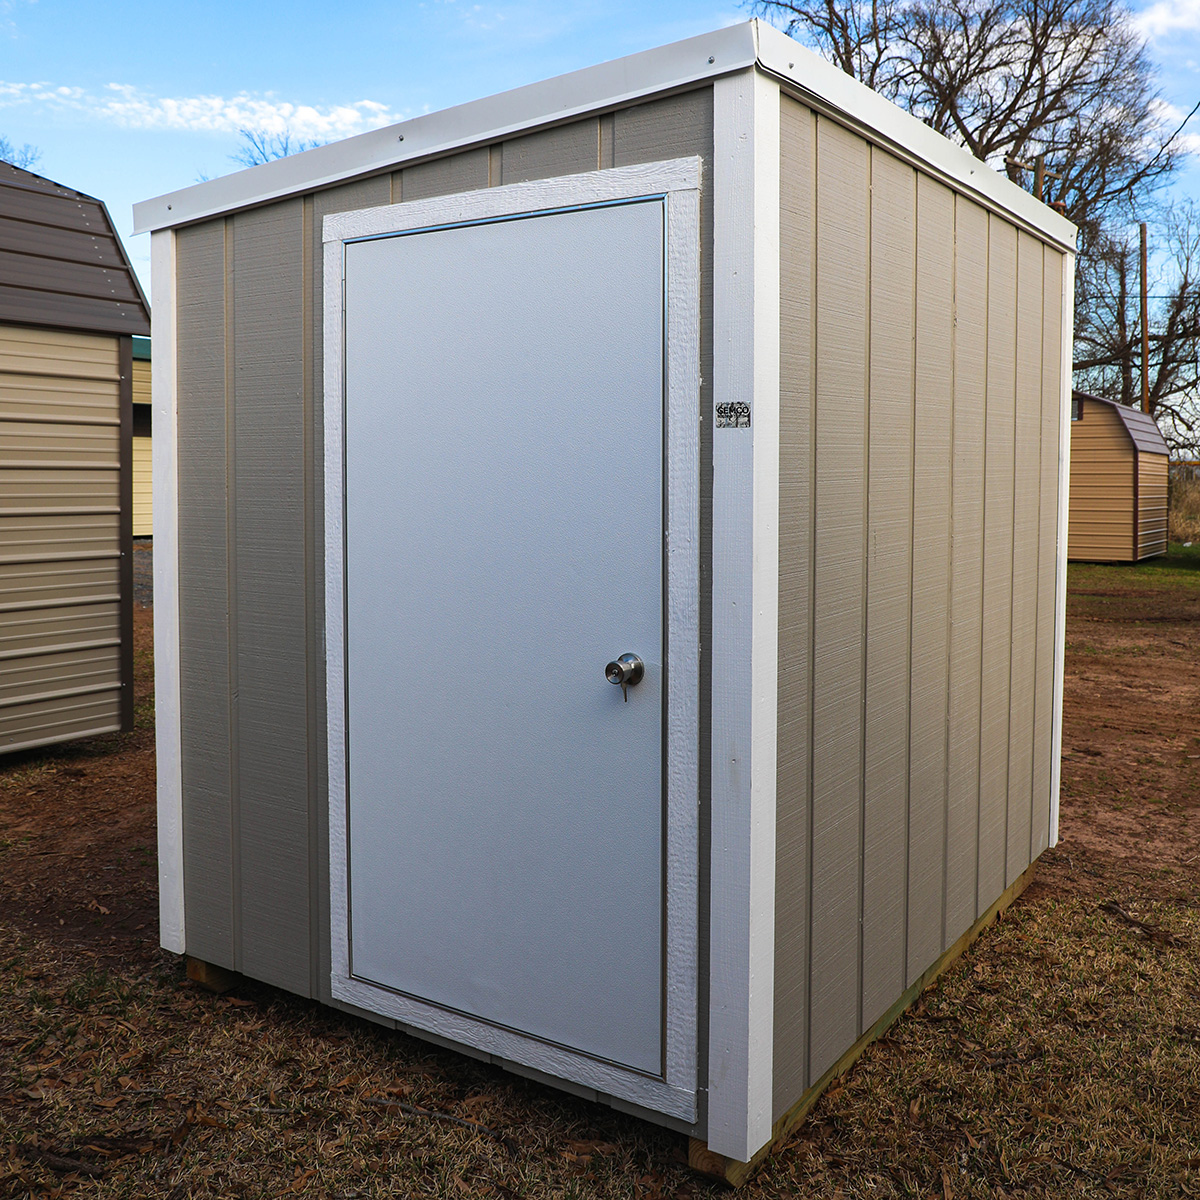 cheap sheds for sale